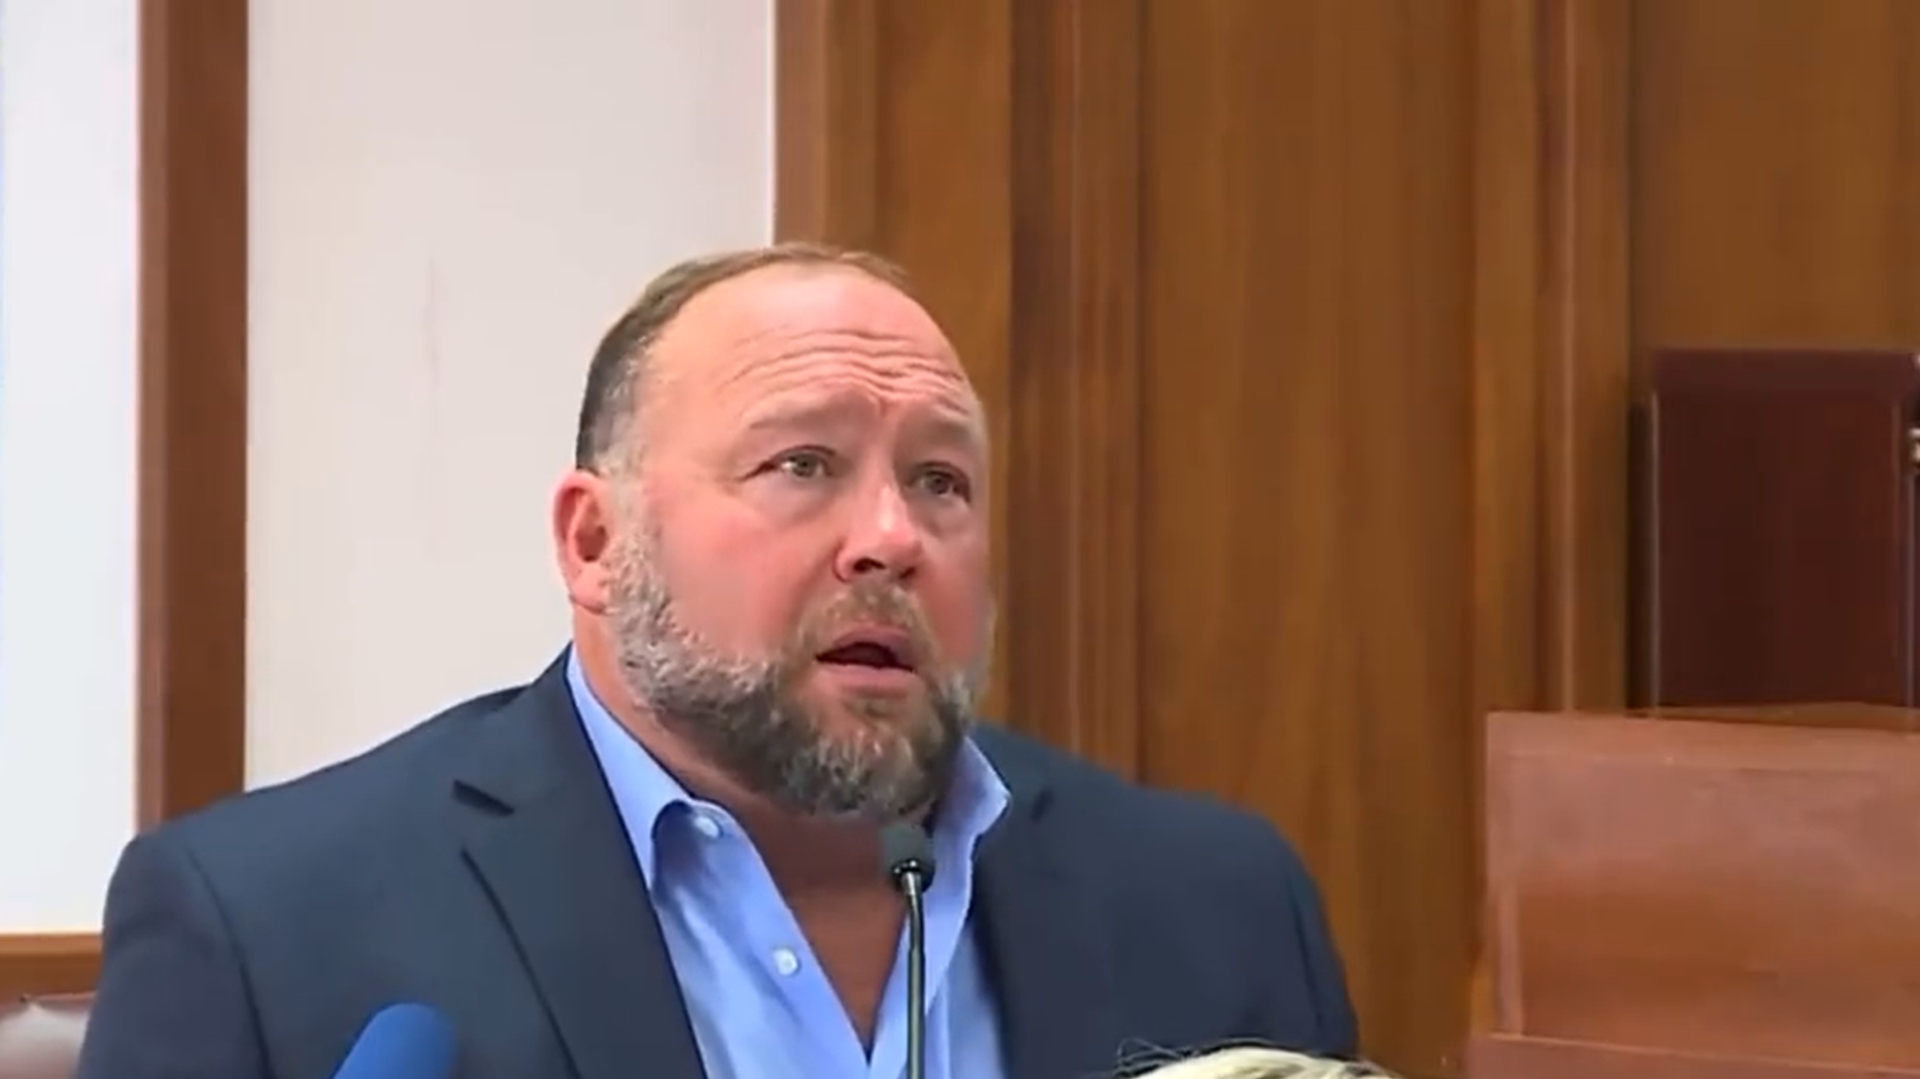 Infowars founder Alex Jones in a Texas court facing defamation charges by a family of a victim of the 2012 Sandy Hook shooting - Sputnik International, 1920, 06.08.2022